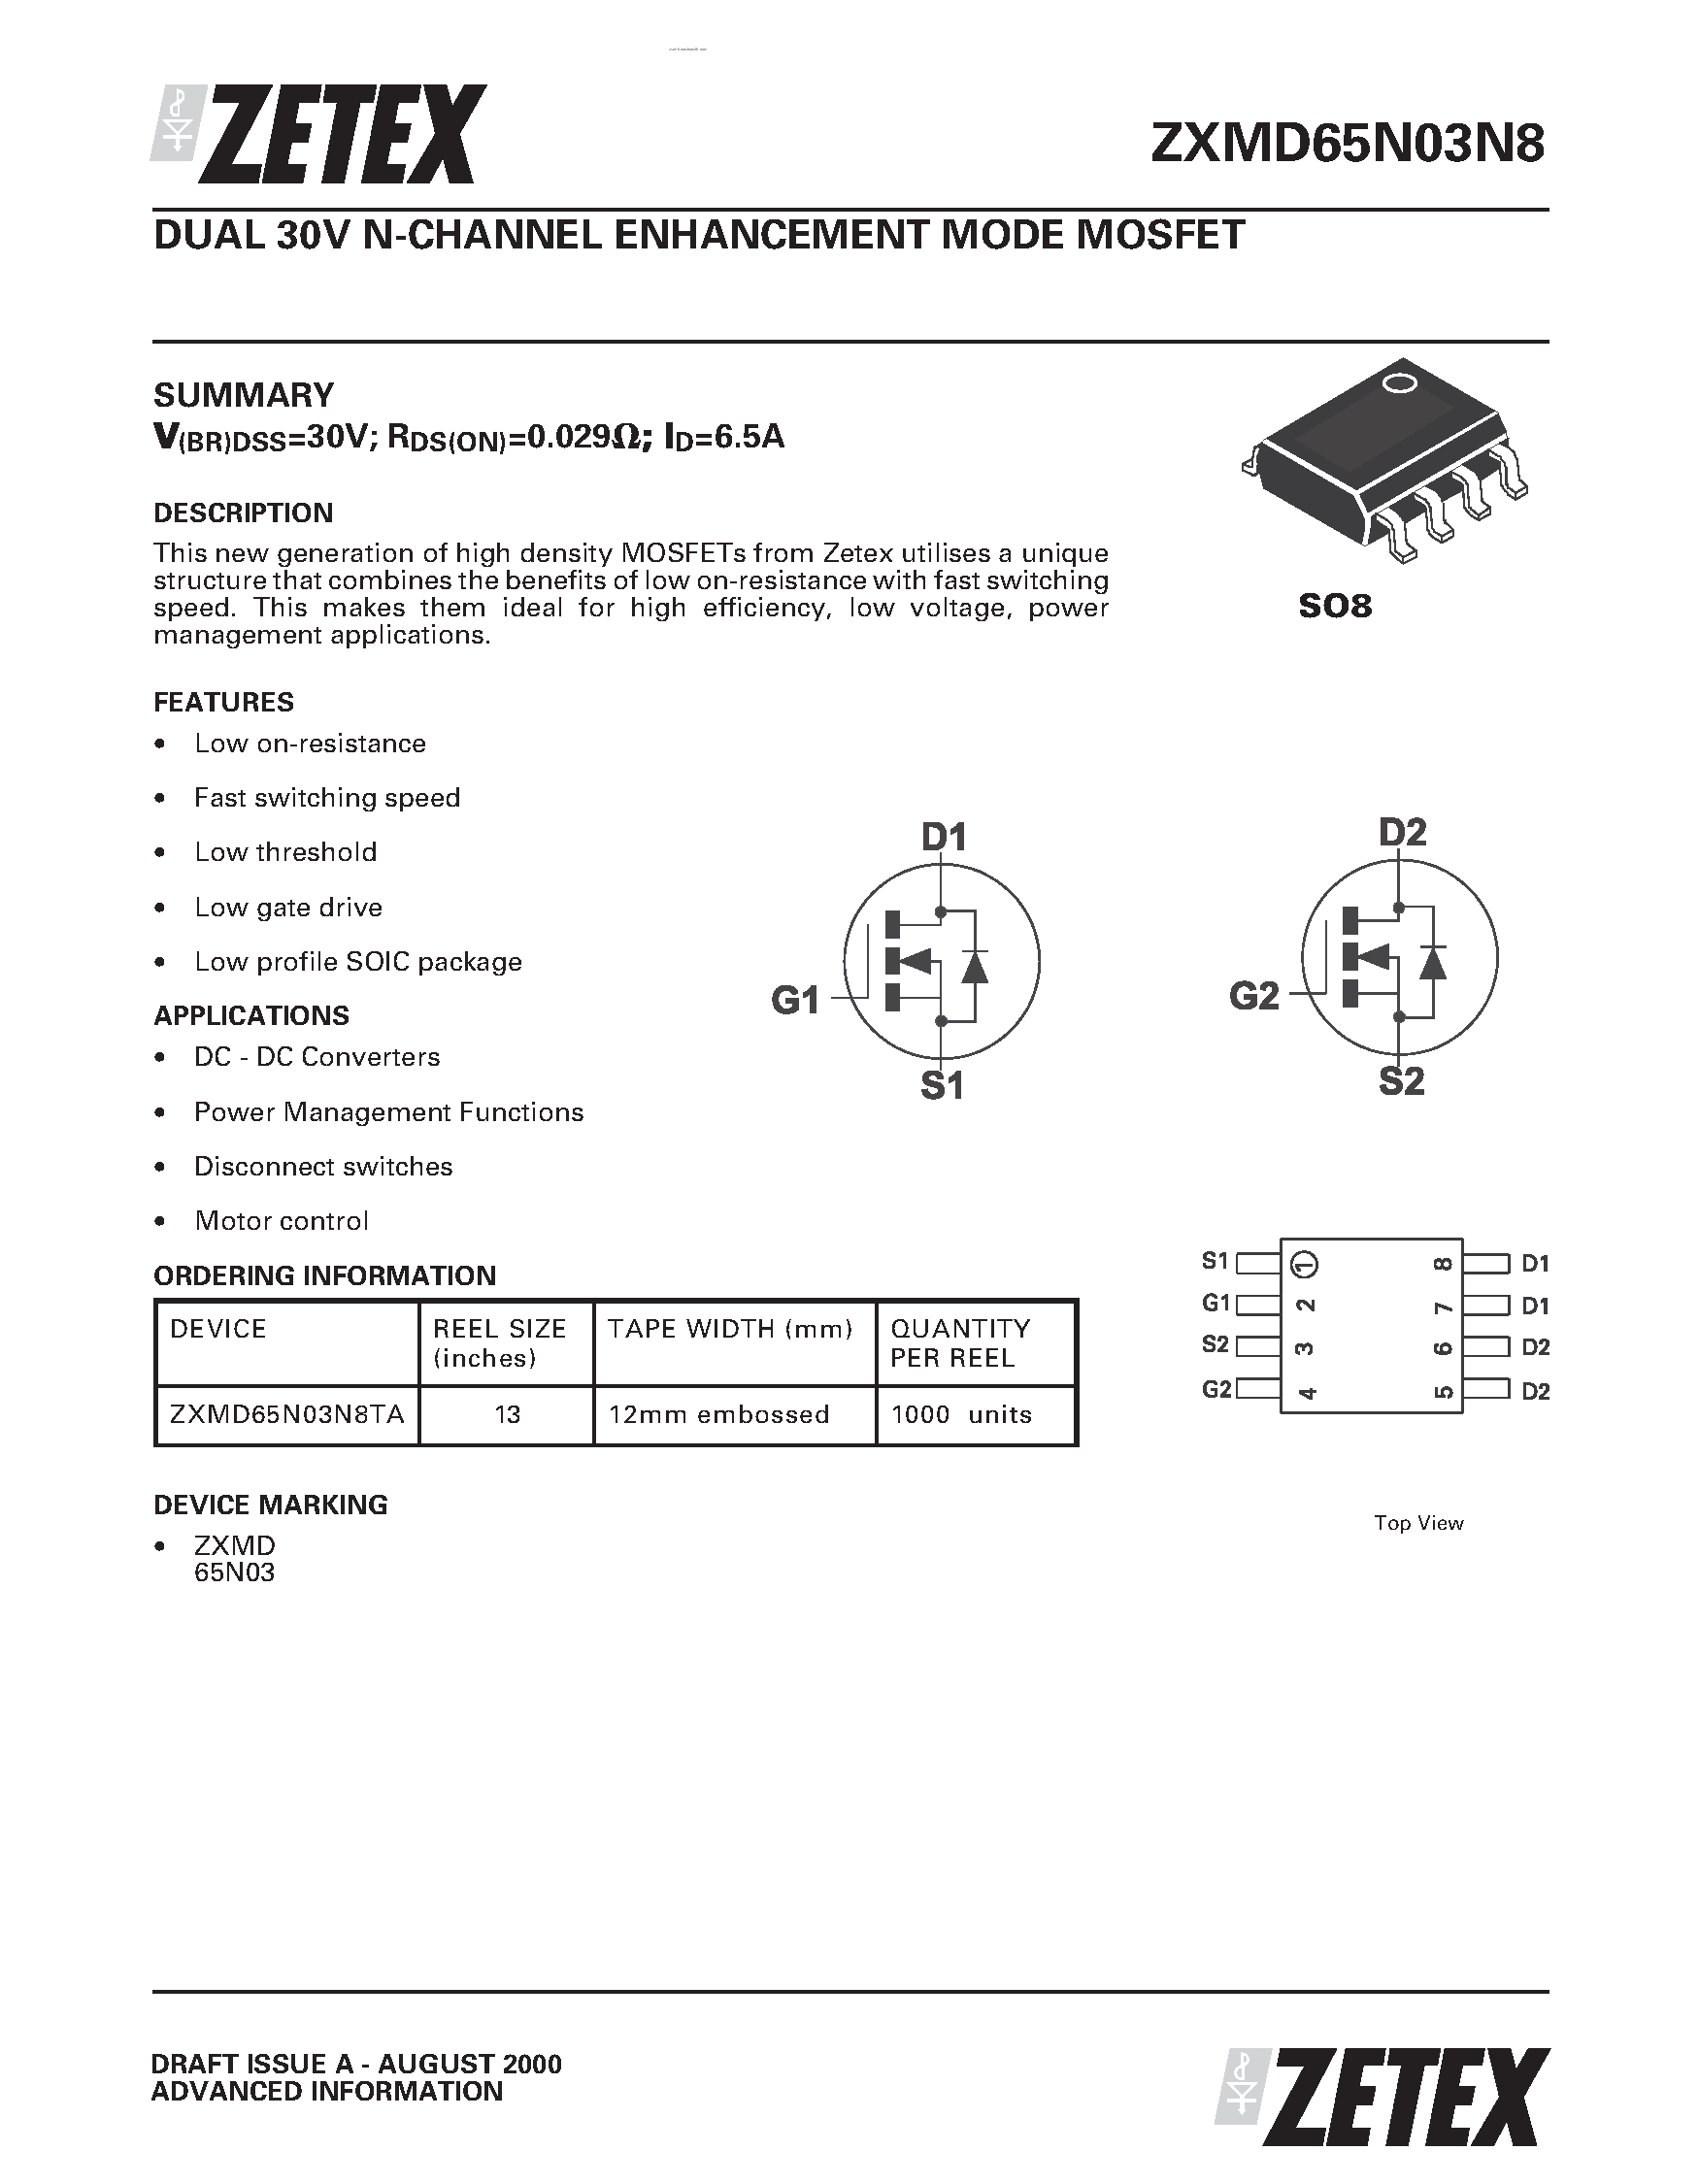 Datasheet ZXMD65N03N8 - DUAL 30V N-CHANNEL ENHANCEMENT MODE MOSFET page 1